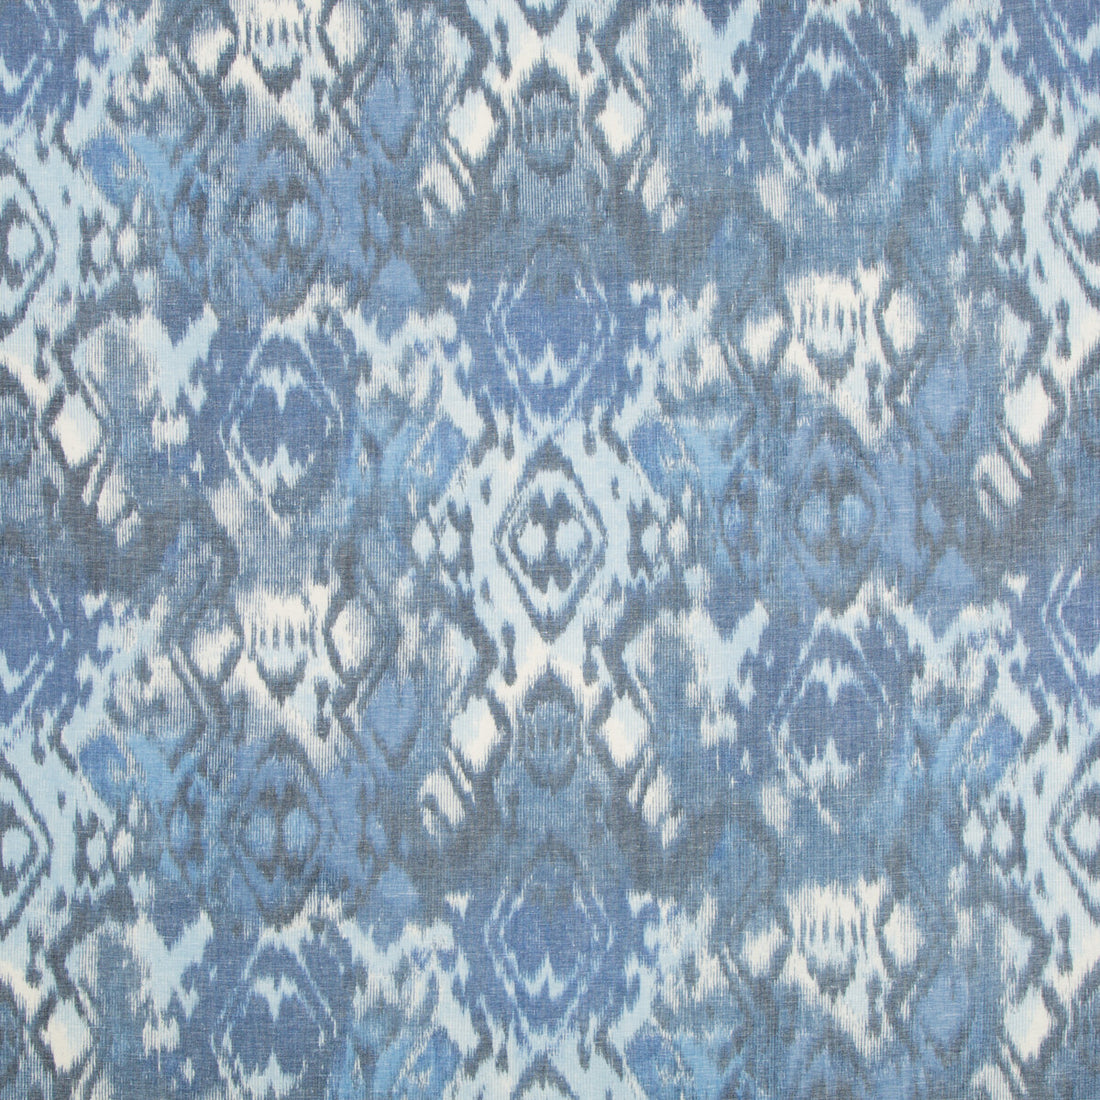 Les Nomades Print fabric in blue color - pattern 8017136.5.0 - by Brunschwig &amp; Fils in the Les Ensembliers collection